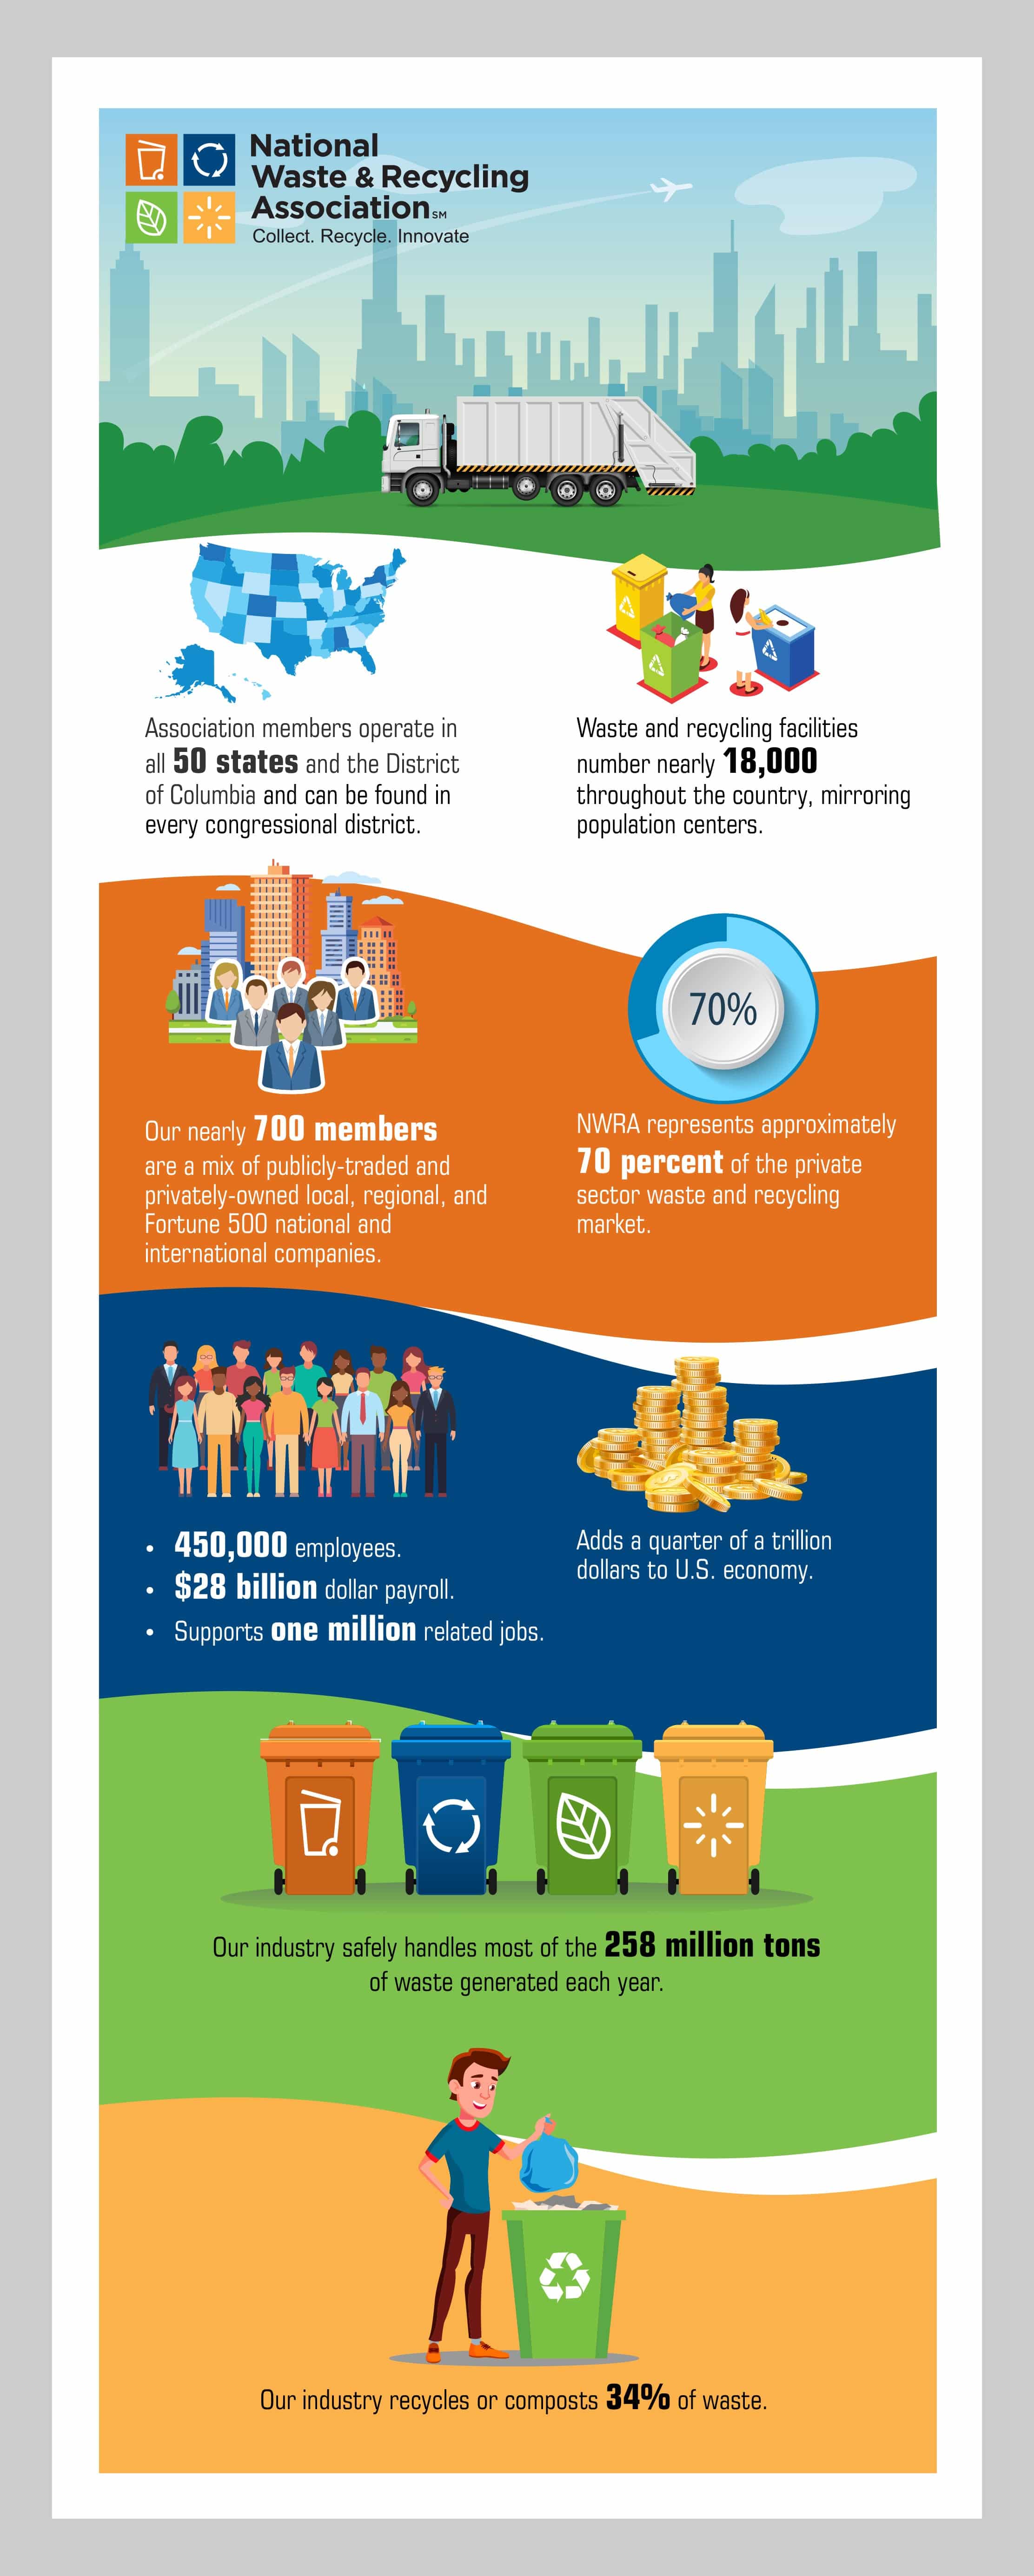 nwra-infographic-highlights-the-waste-and-recycling-industry-s